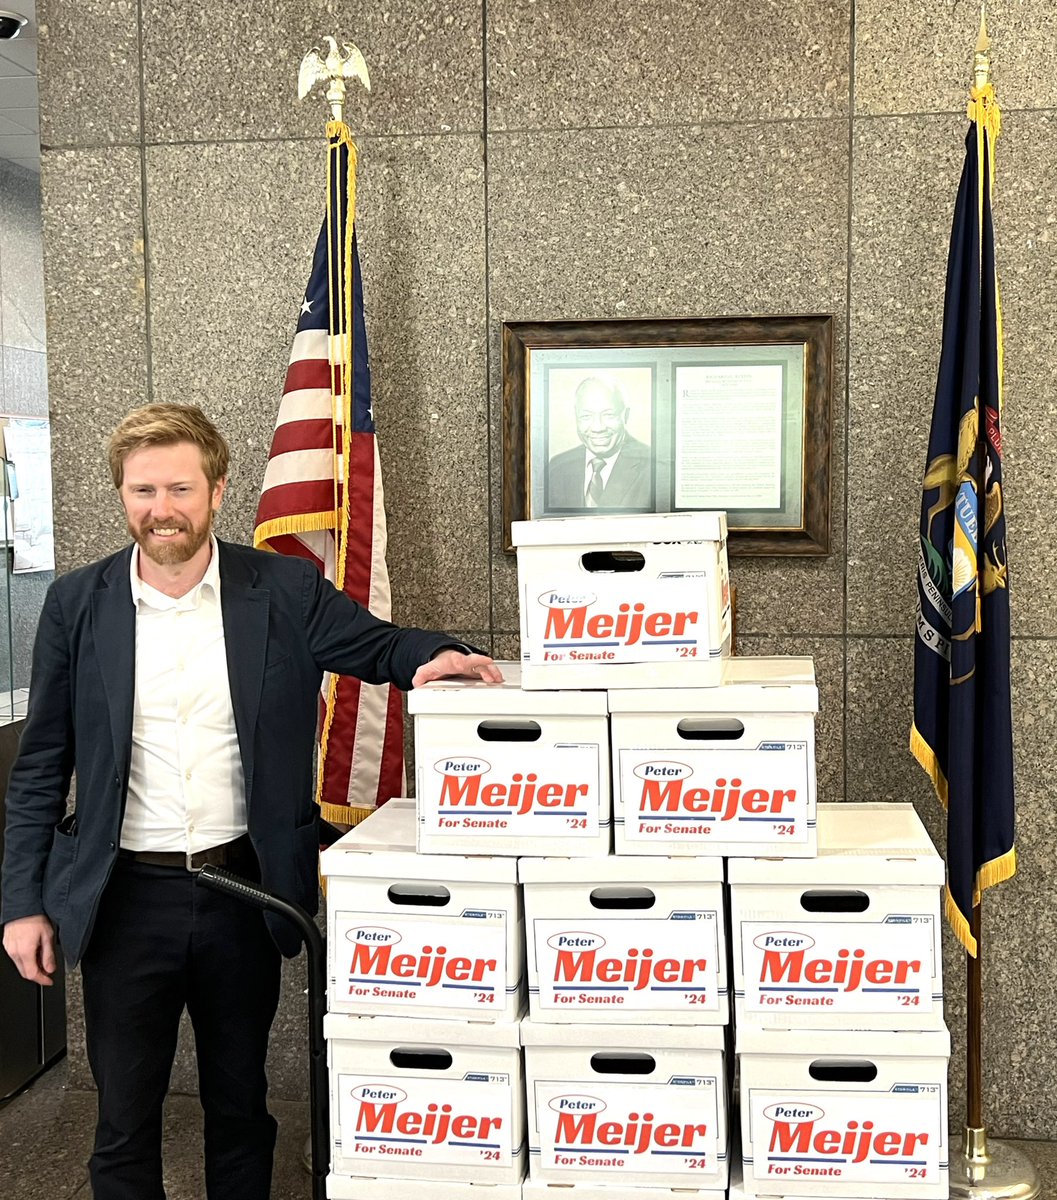 Just got back from Lansing, where we turned in 23,497 signatures from registered voters across the state of Michigan to qualify for the ballot. Thank you to everyone who helped us reach this critical milestone- we could not have done it without you!